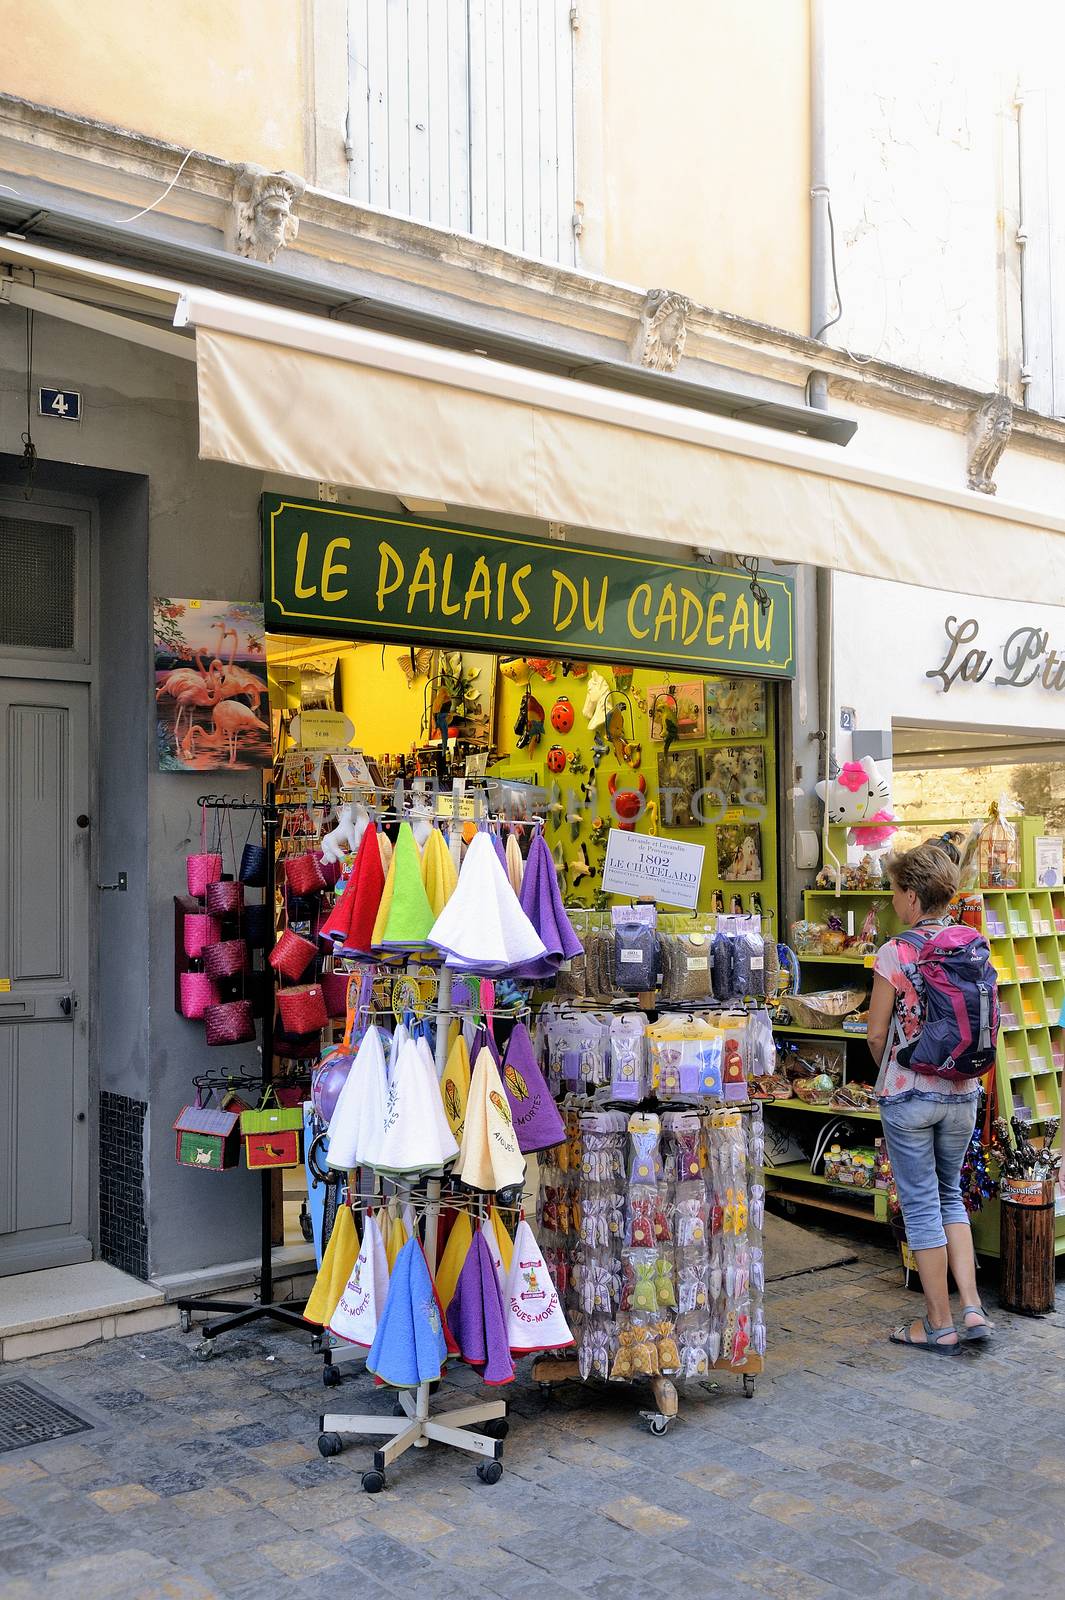 Souvenirs and gadgets in Aigues-Mortes street by gillespaire